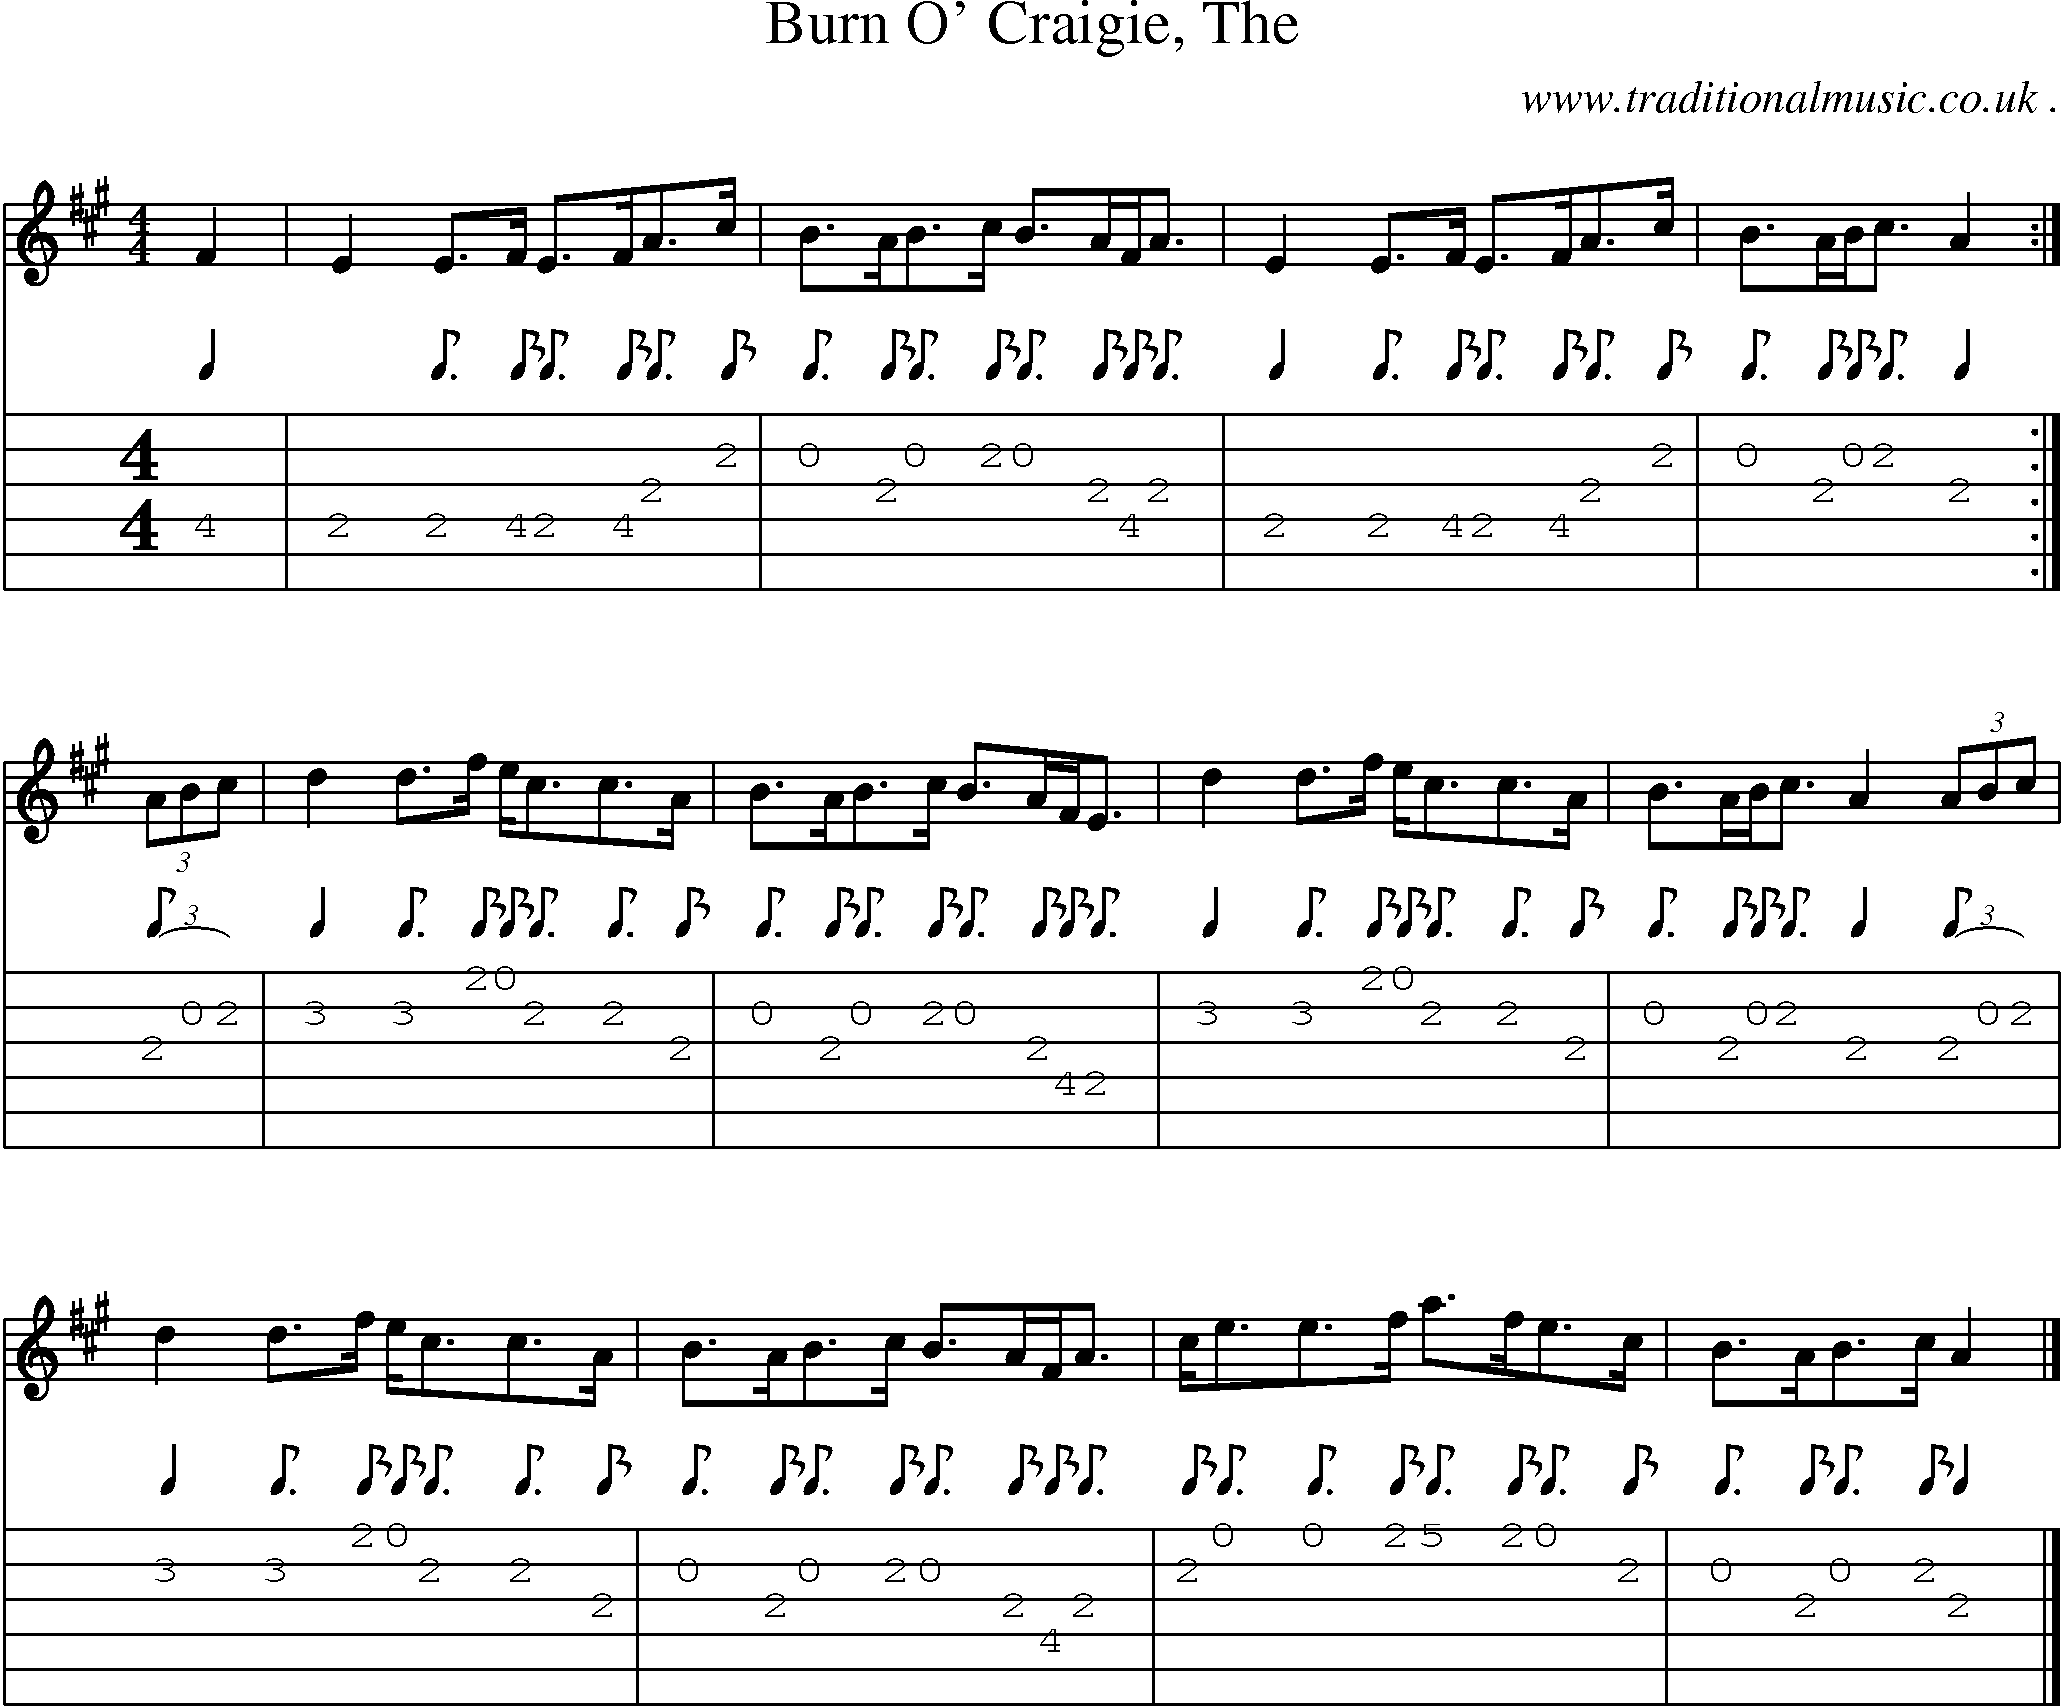 Sheet-music  score, Chords and Guitar Tabs for Burn O Craigie The